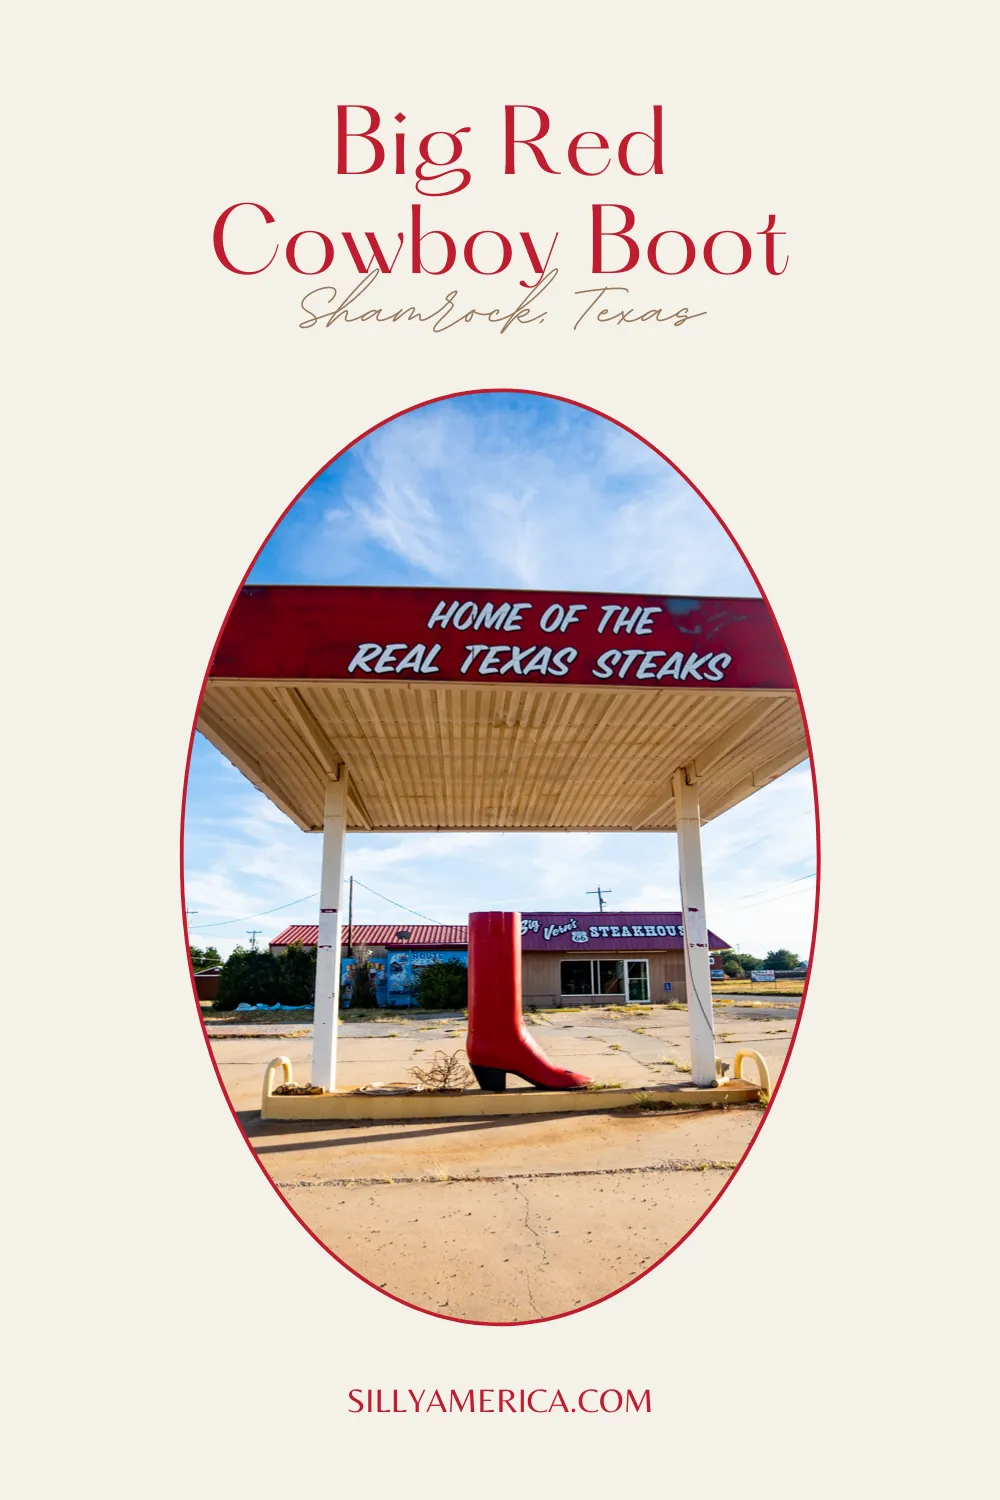 Here's hoping this Texas Route 66 roadside attraction doesn't get the boot anytime soon! Find this Big Red Cowboy Boot at Big Vern’s Steakhouse in Shamrock, Texas. Visit this weird roadside attraction on your Route 66 road trip - add it to your travel itinerary now!  #RoadTrips #RoadTripStop #Route66 #Route66RoadTrip #TexasRoute66 #Texas #TexasRoadTrip #TexasRoadsideAttractions #RoadsideAttractions #RoadsideAttraction #RoadsideAmerica #RoadTrip 